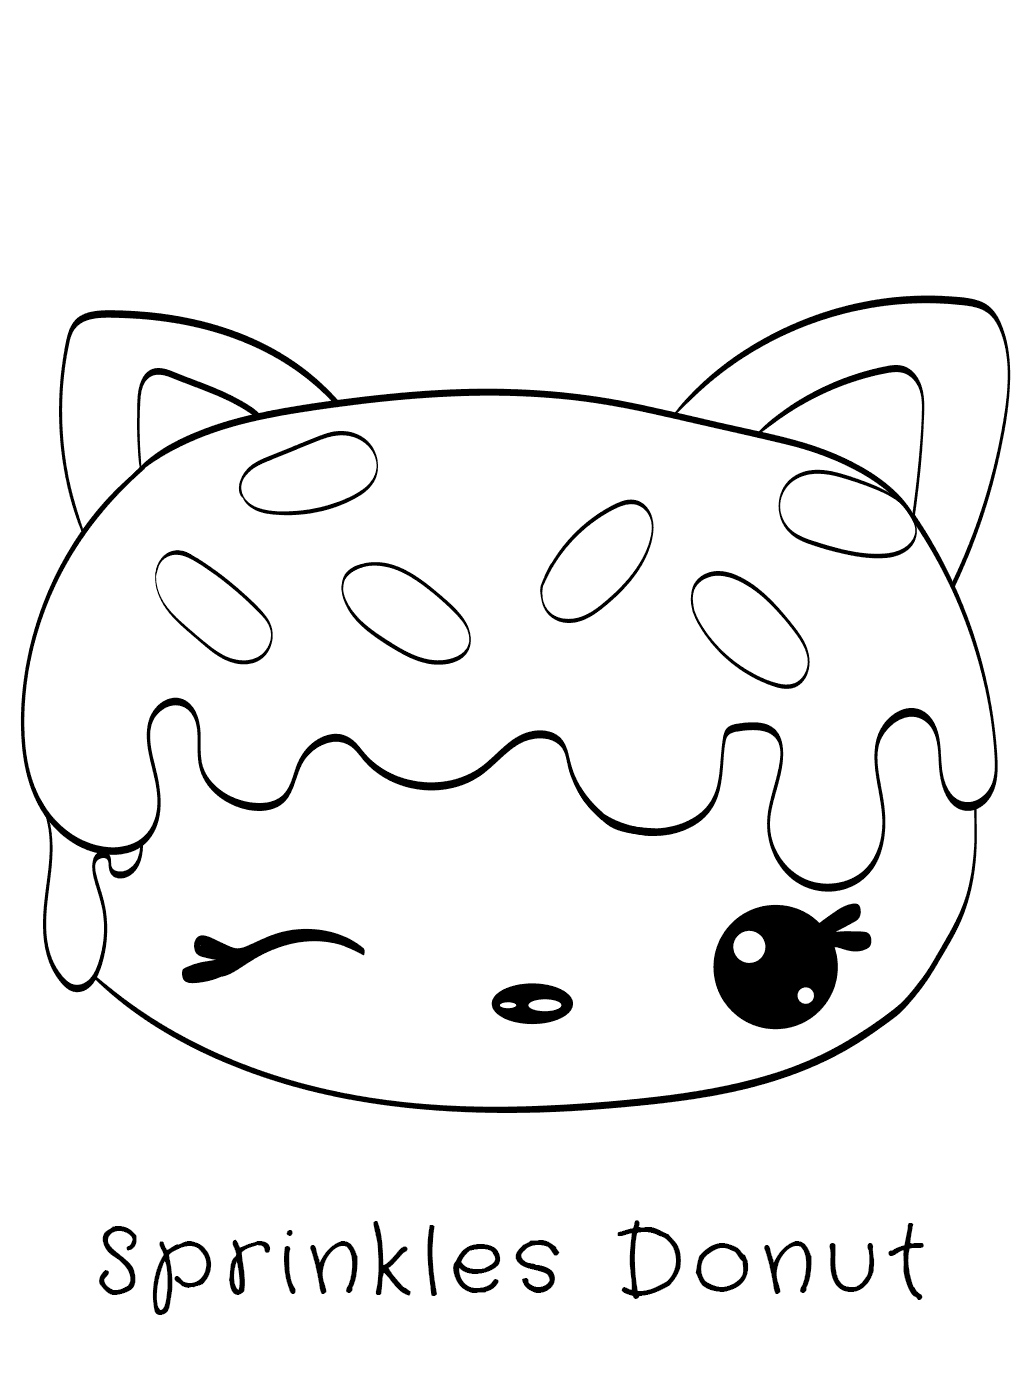 glazed donut coloring page